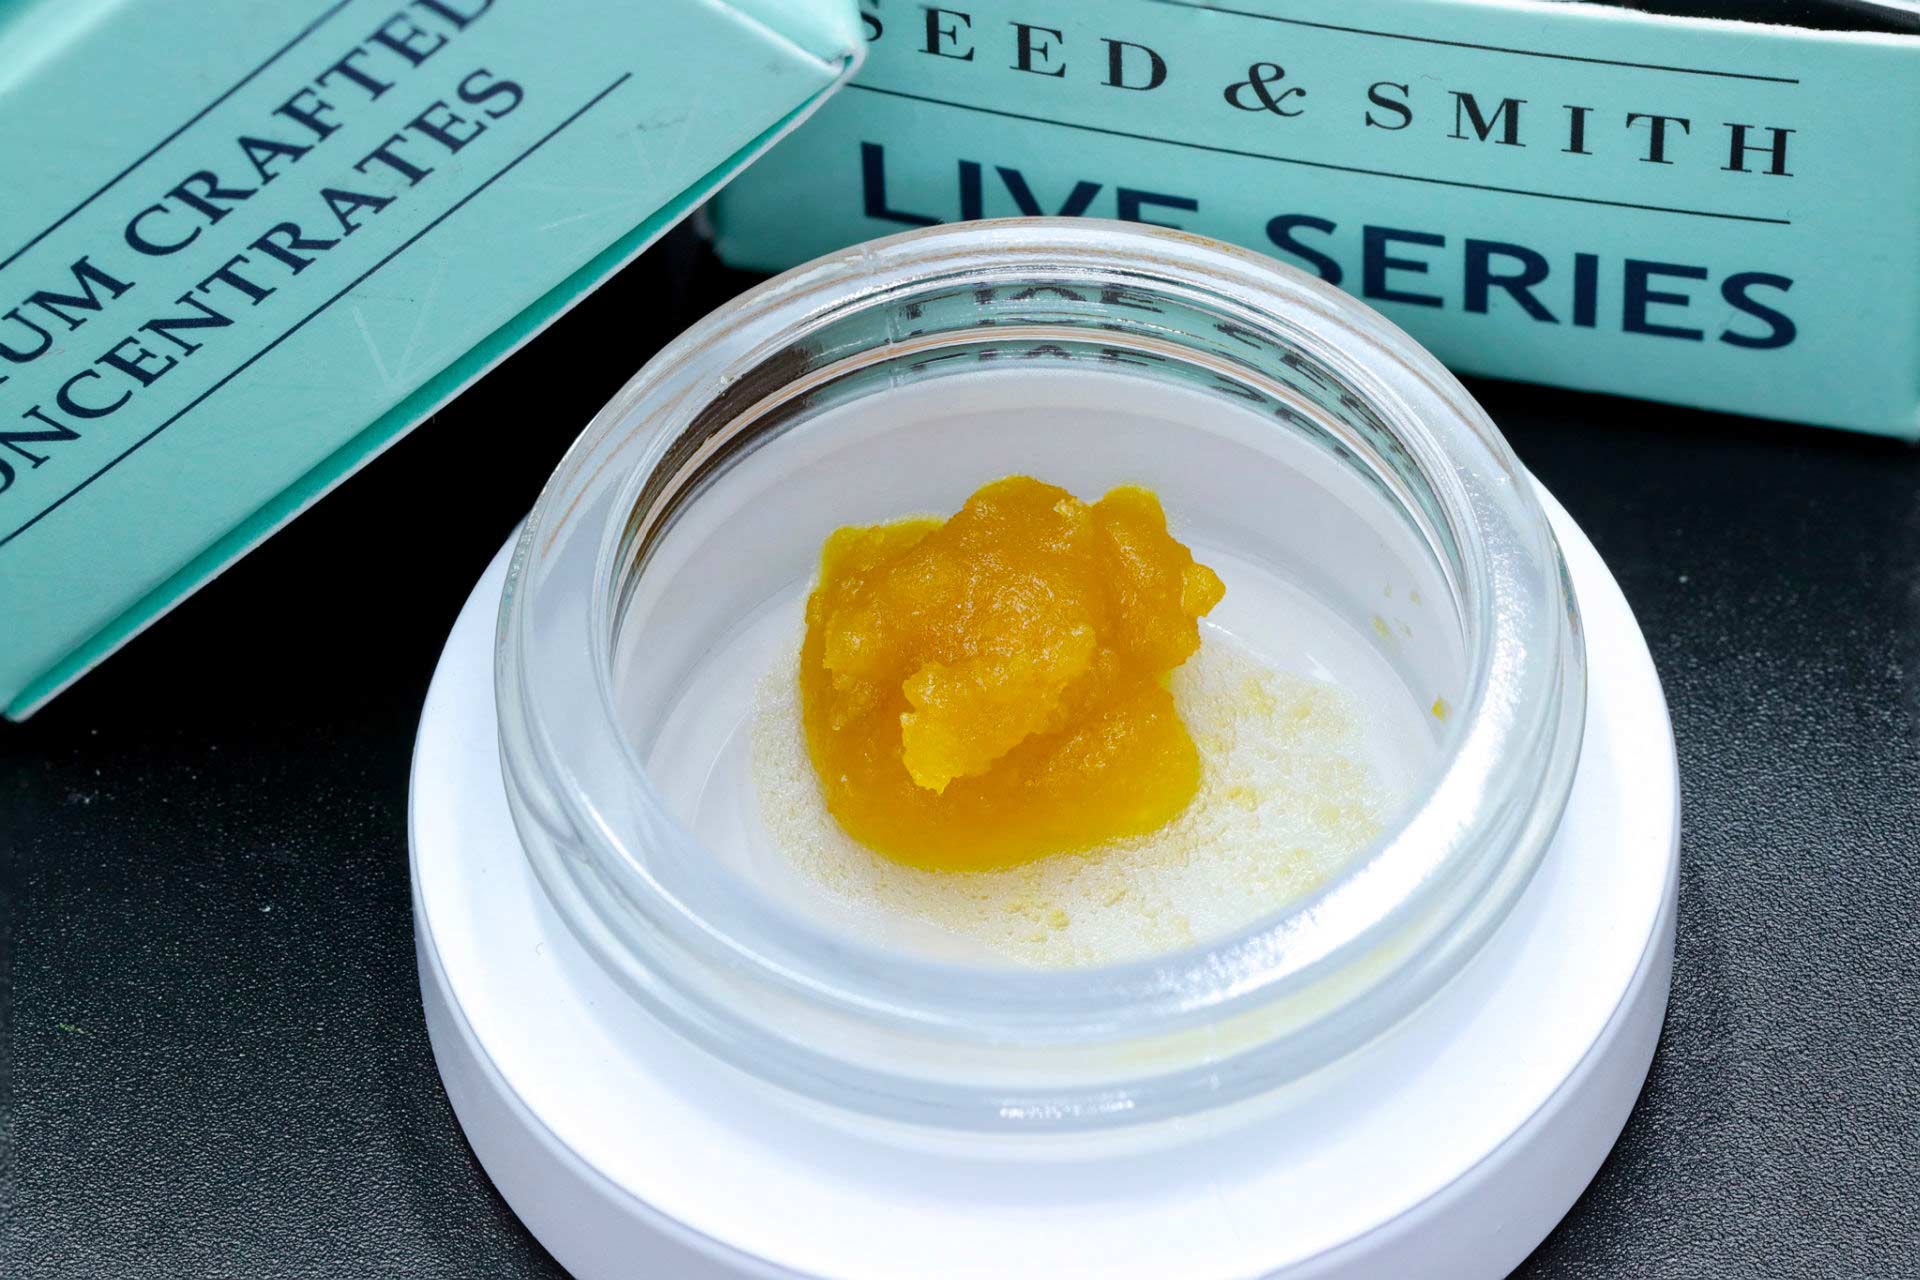 Seed & Smith live resin concentrate in a jar with packaging in background.